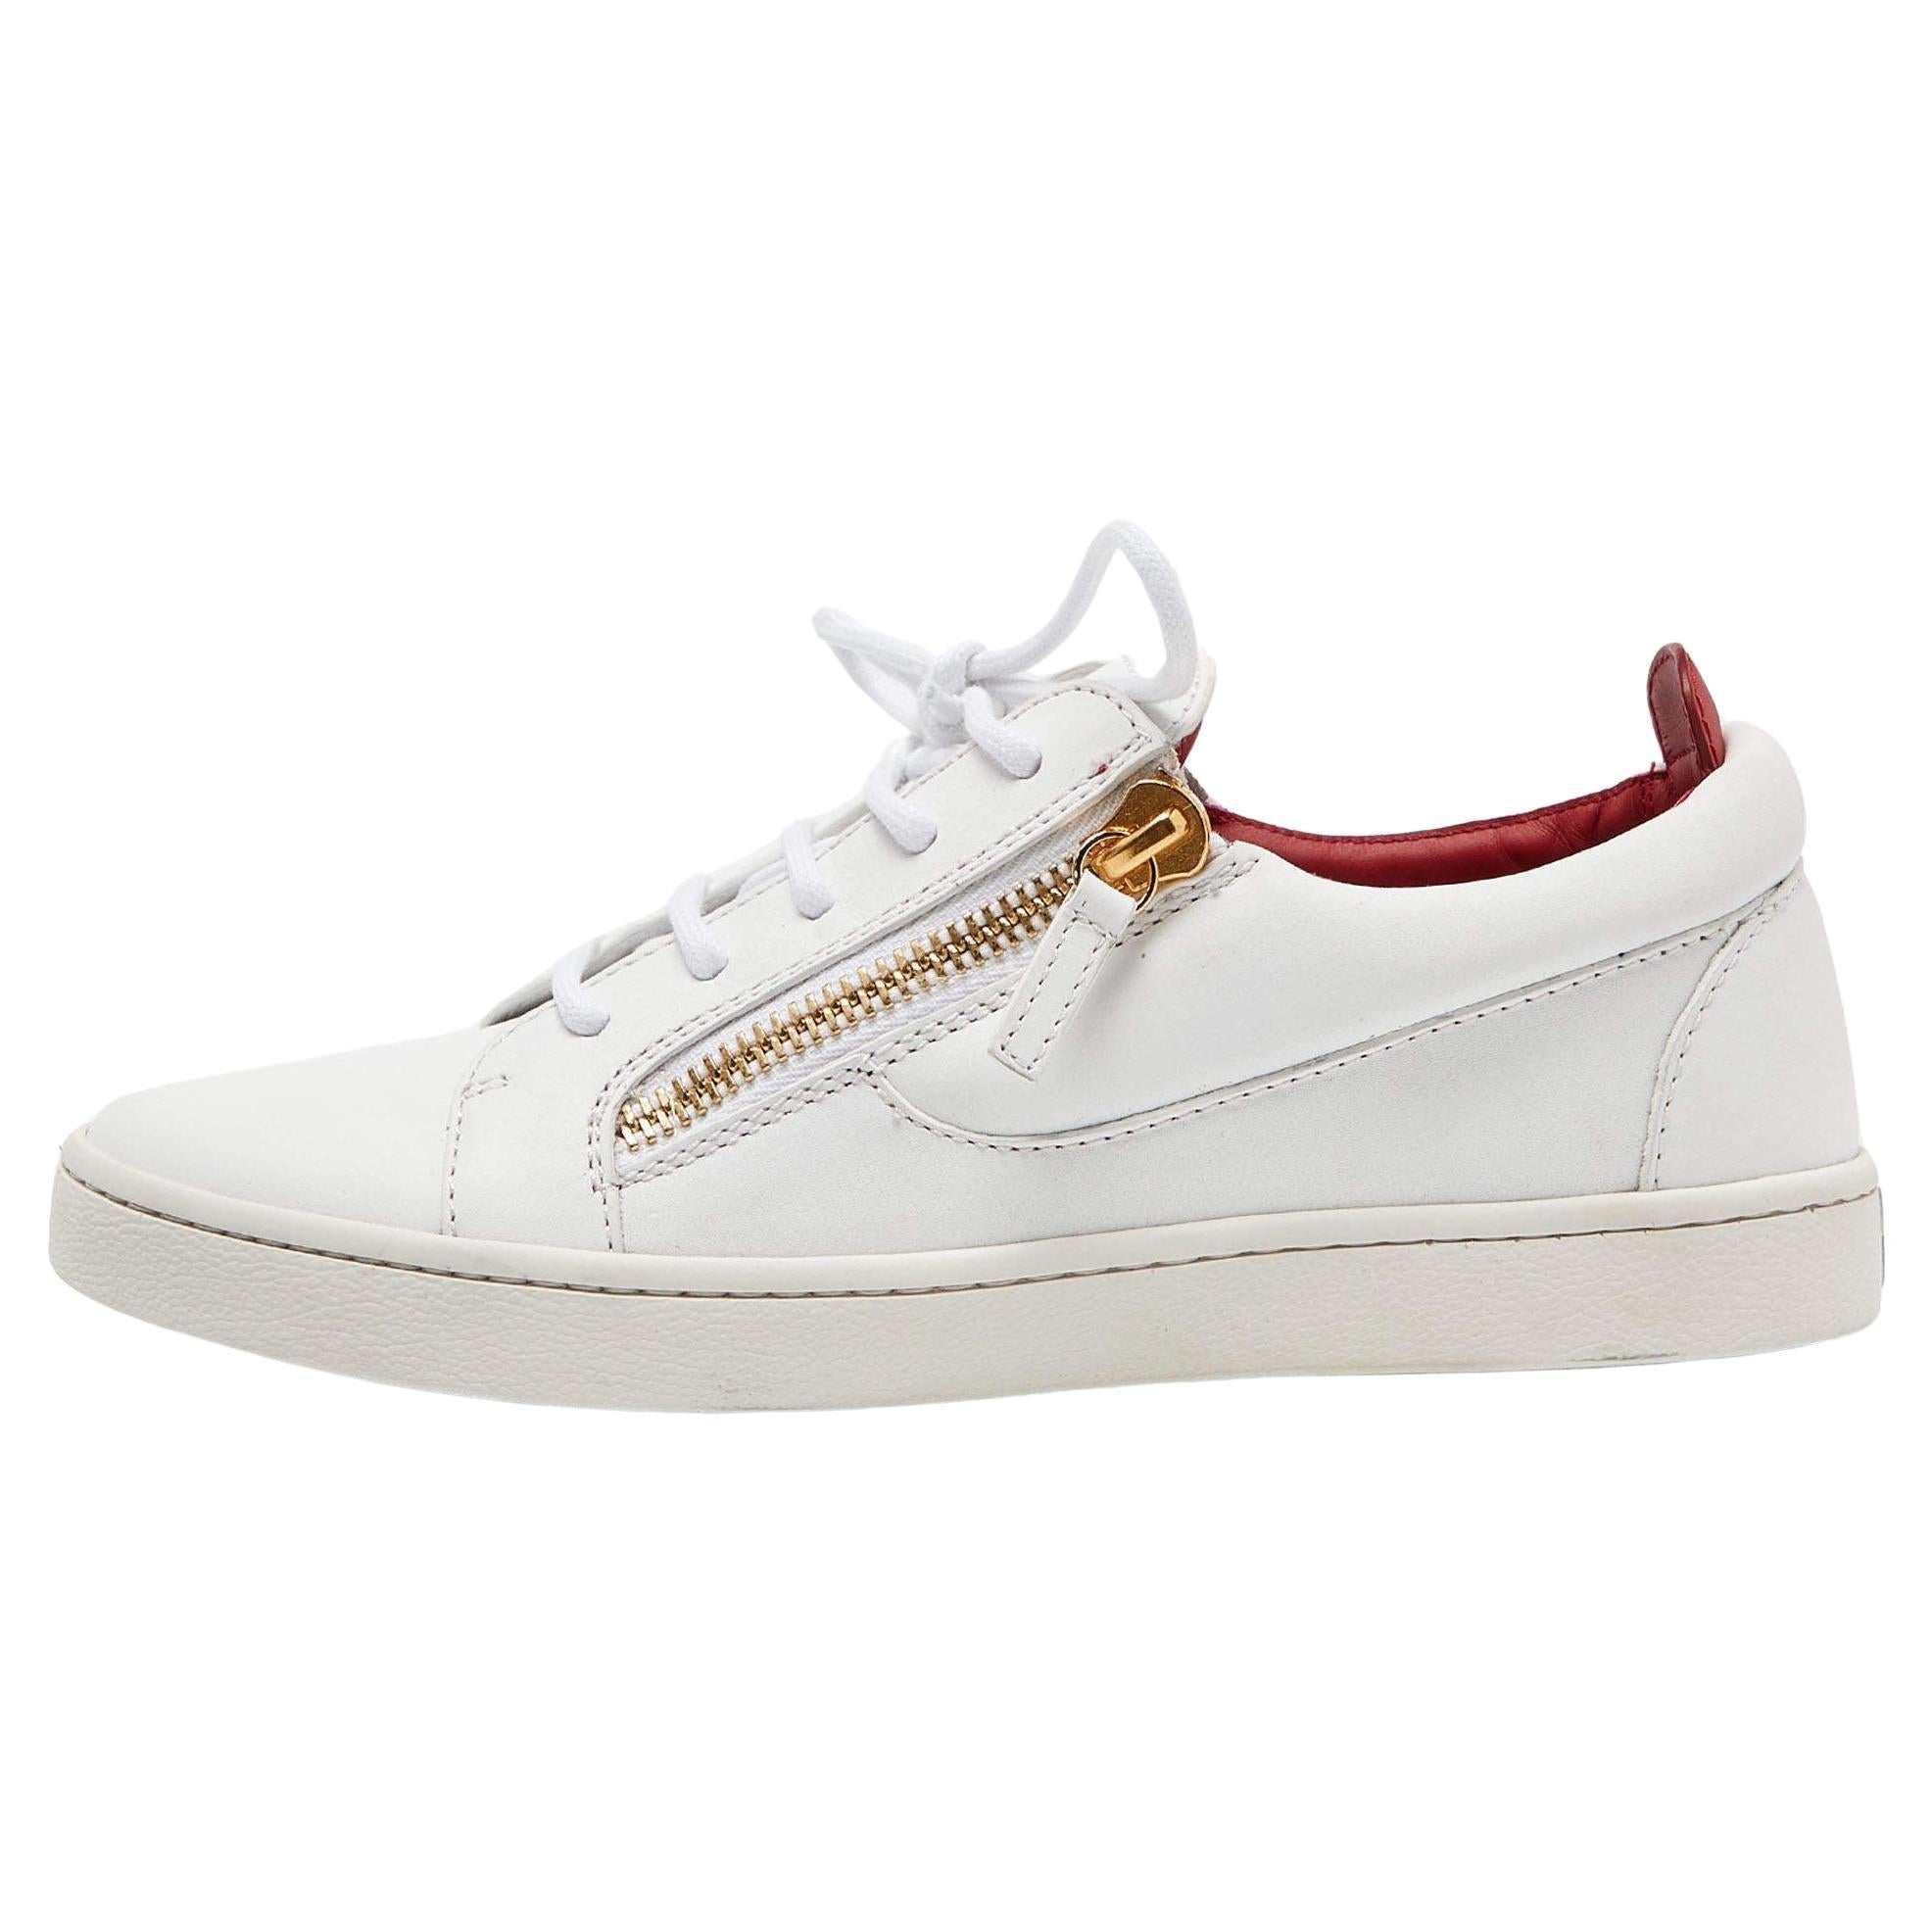 Giuseppe Zanotti White Leather Brek Low Top Sneakers Size 39 For Sale